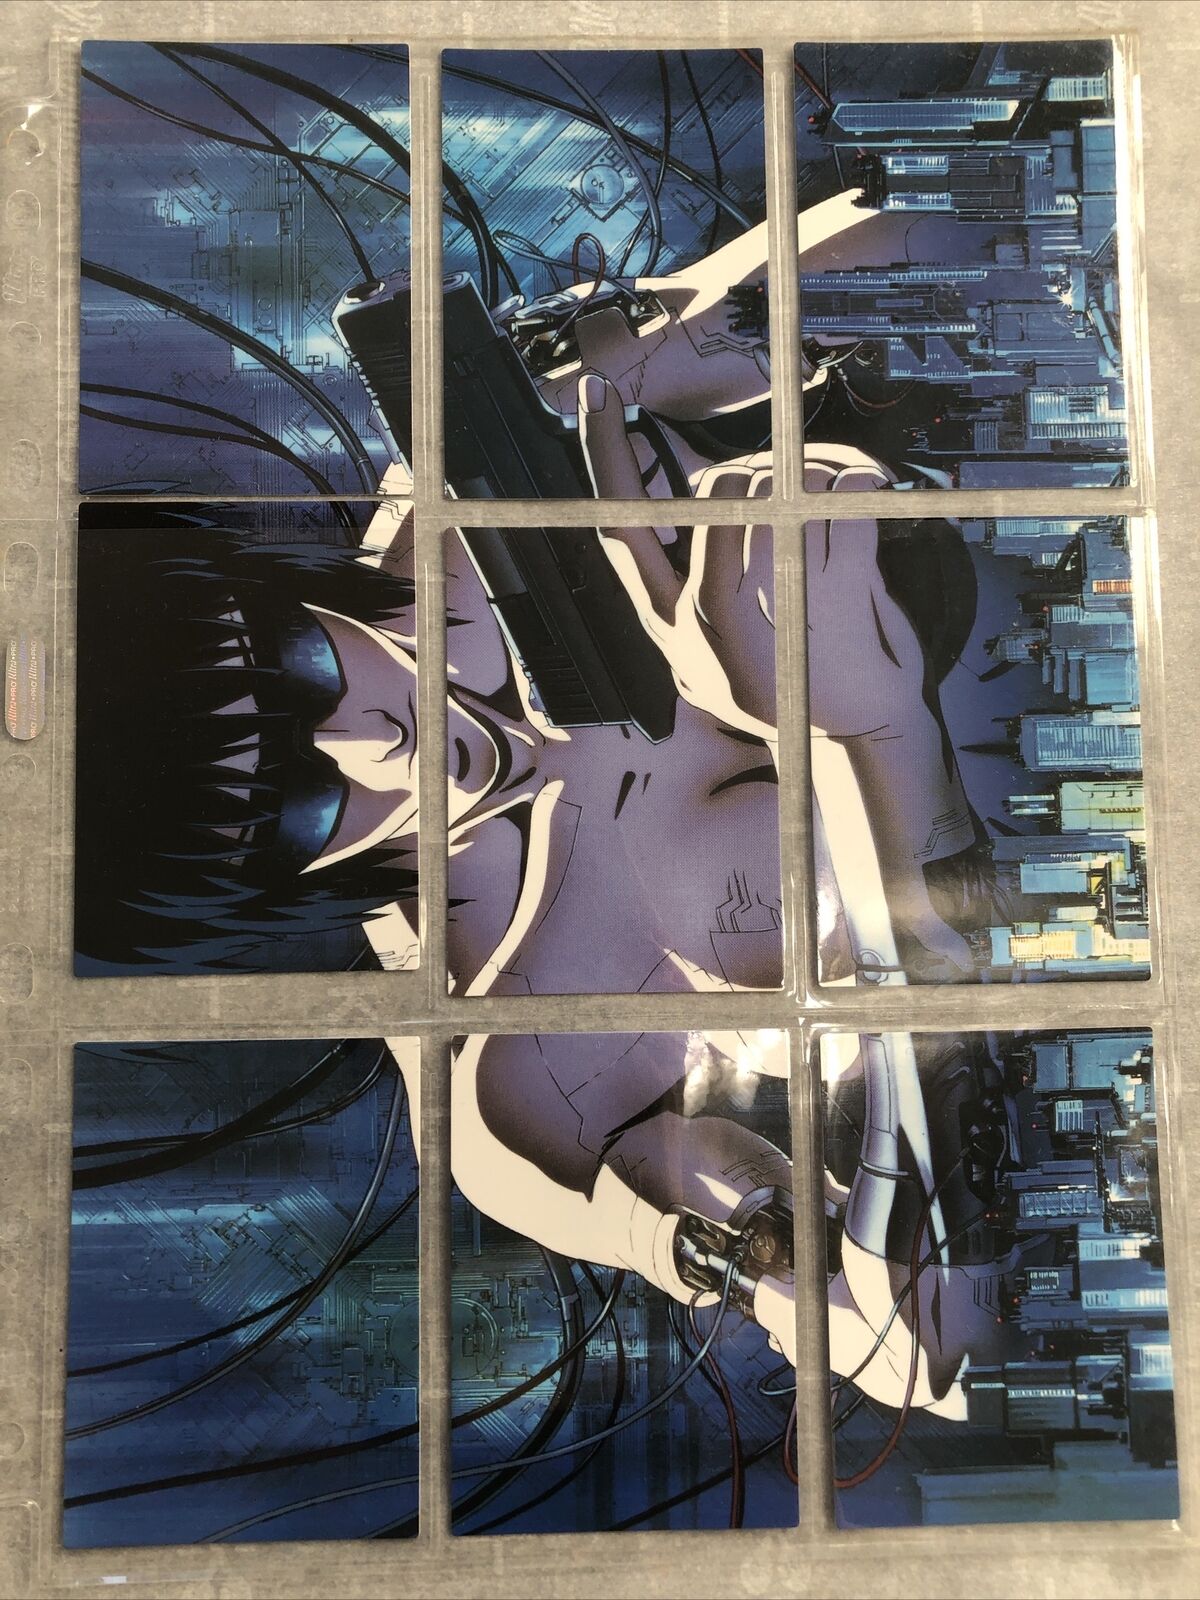 Ghost In The Shell Anime Trading Cards Bandai 1997 Carddass Lot